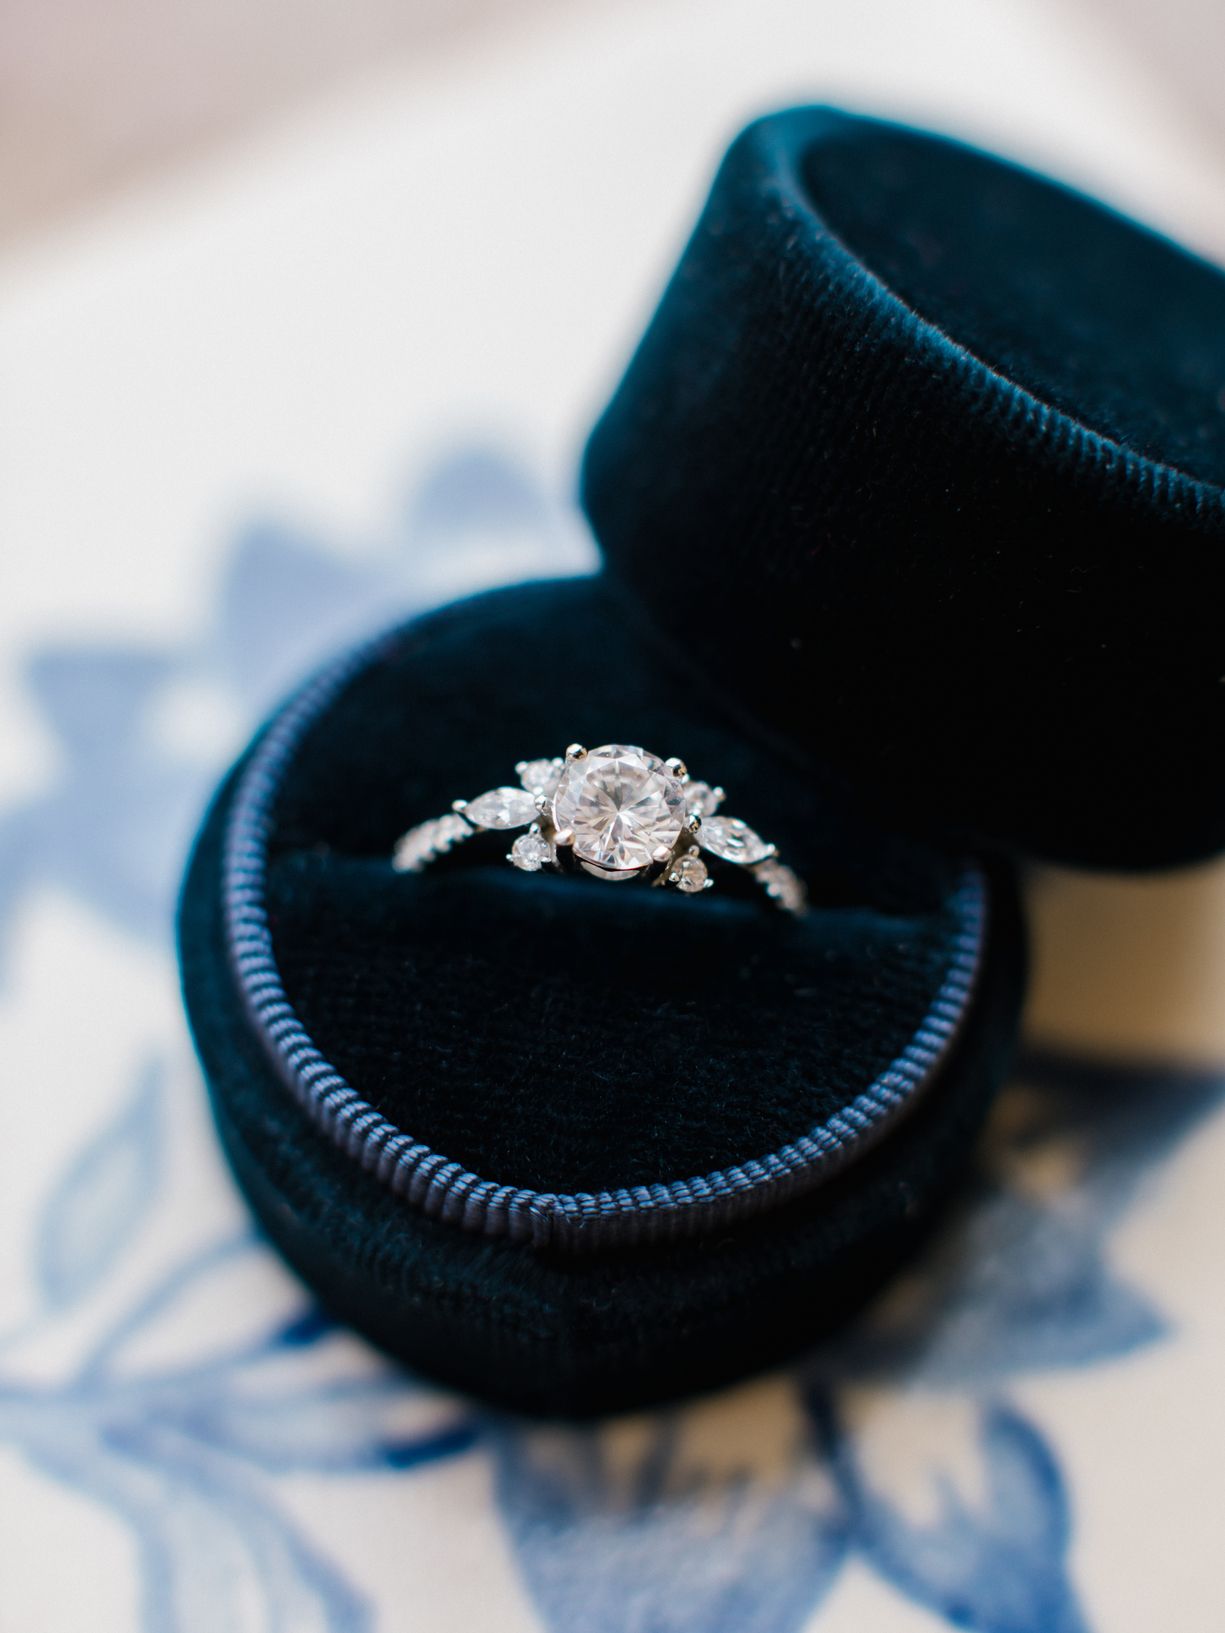 The Right Way to Wear a Wedding Ring (+17 FAQs Answered)